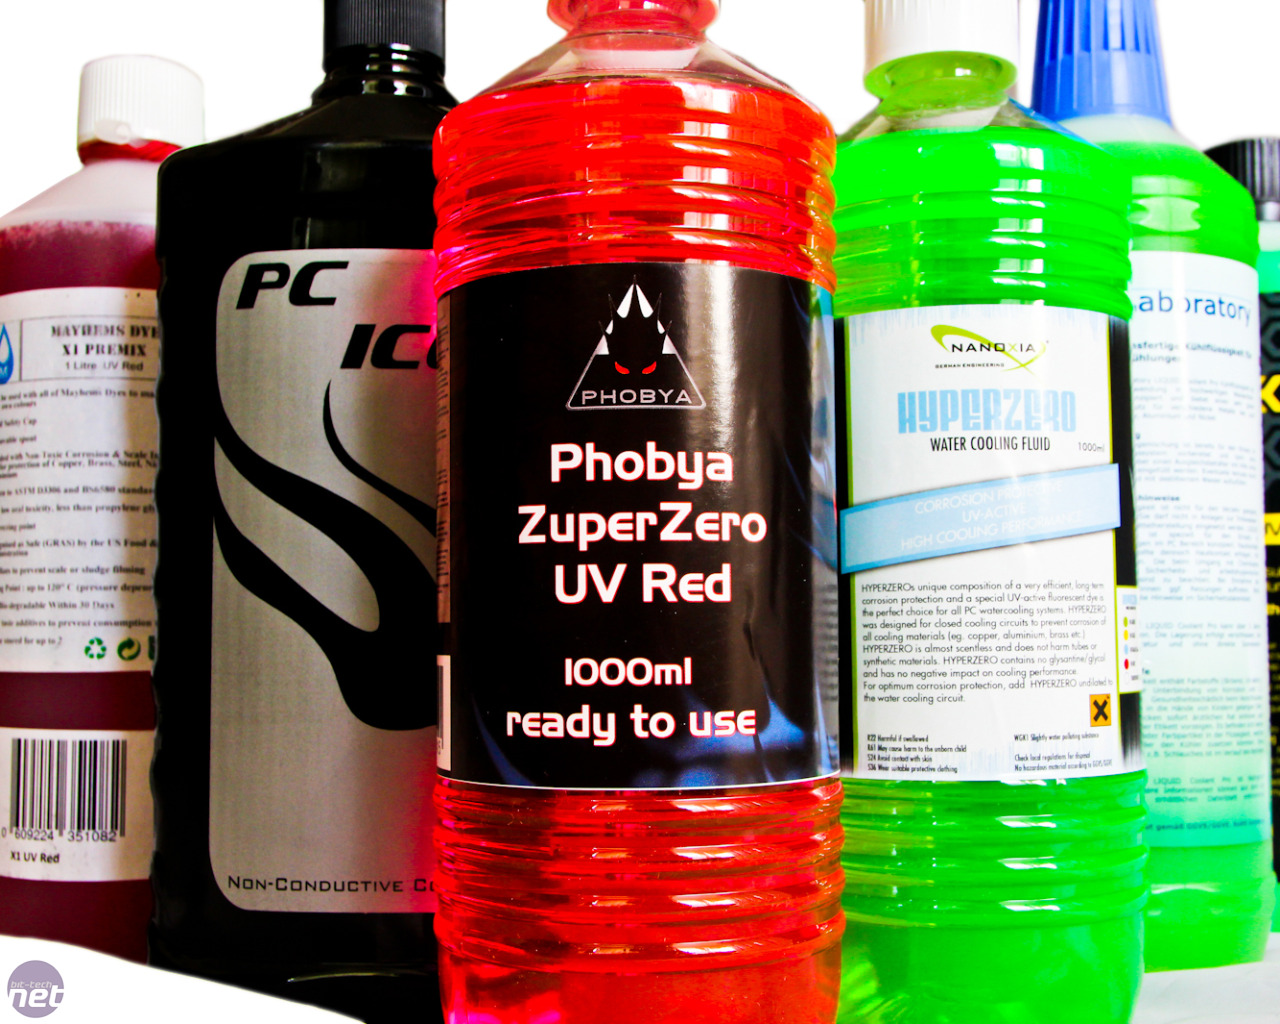 http://images.bit-tech.net/content_images/2012/03/what-s-the-best-uv-watercooling-coolant/1l.jpg